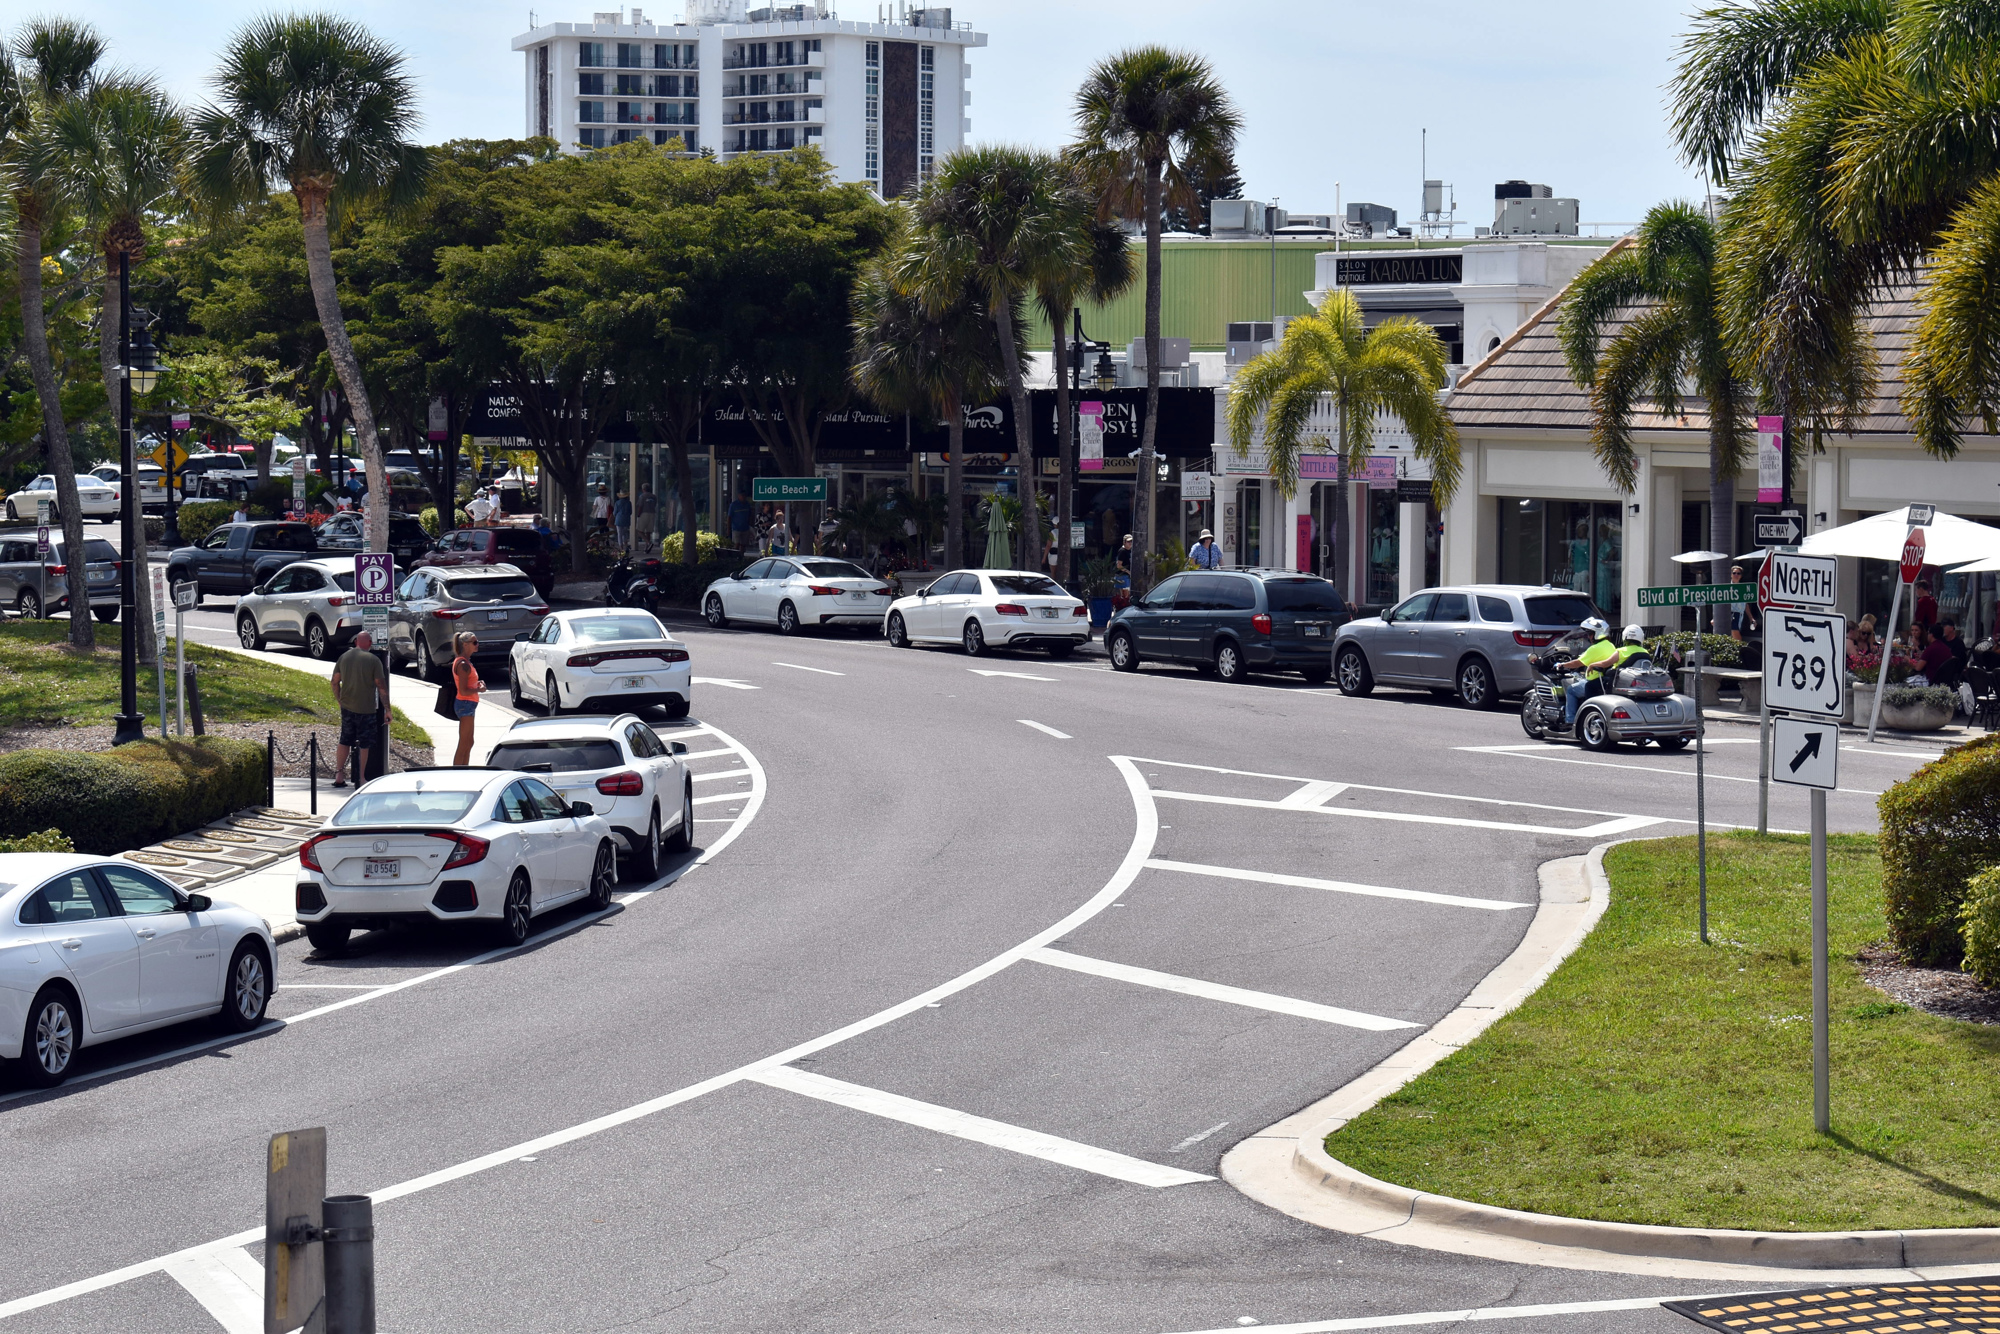 St. Armands Circle was less crowded than usual as many elected to stay home rather than shop.